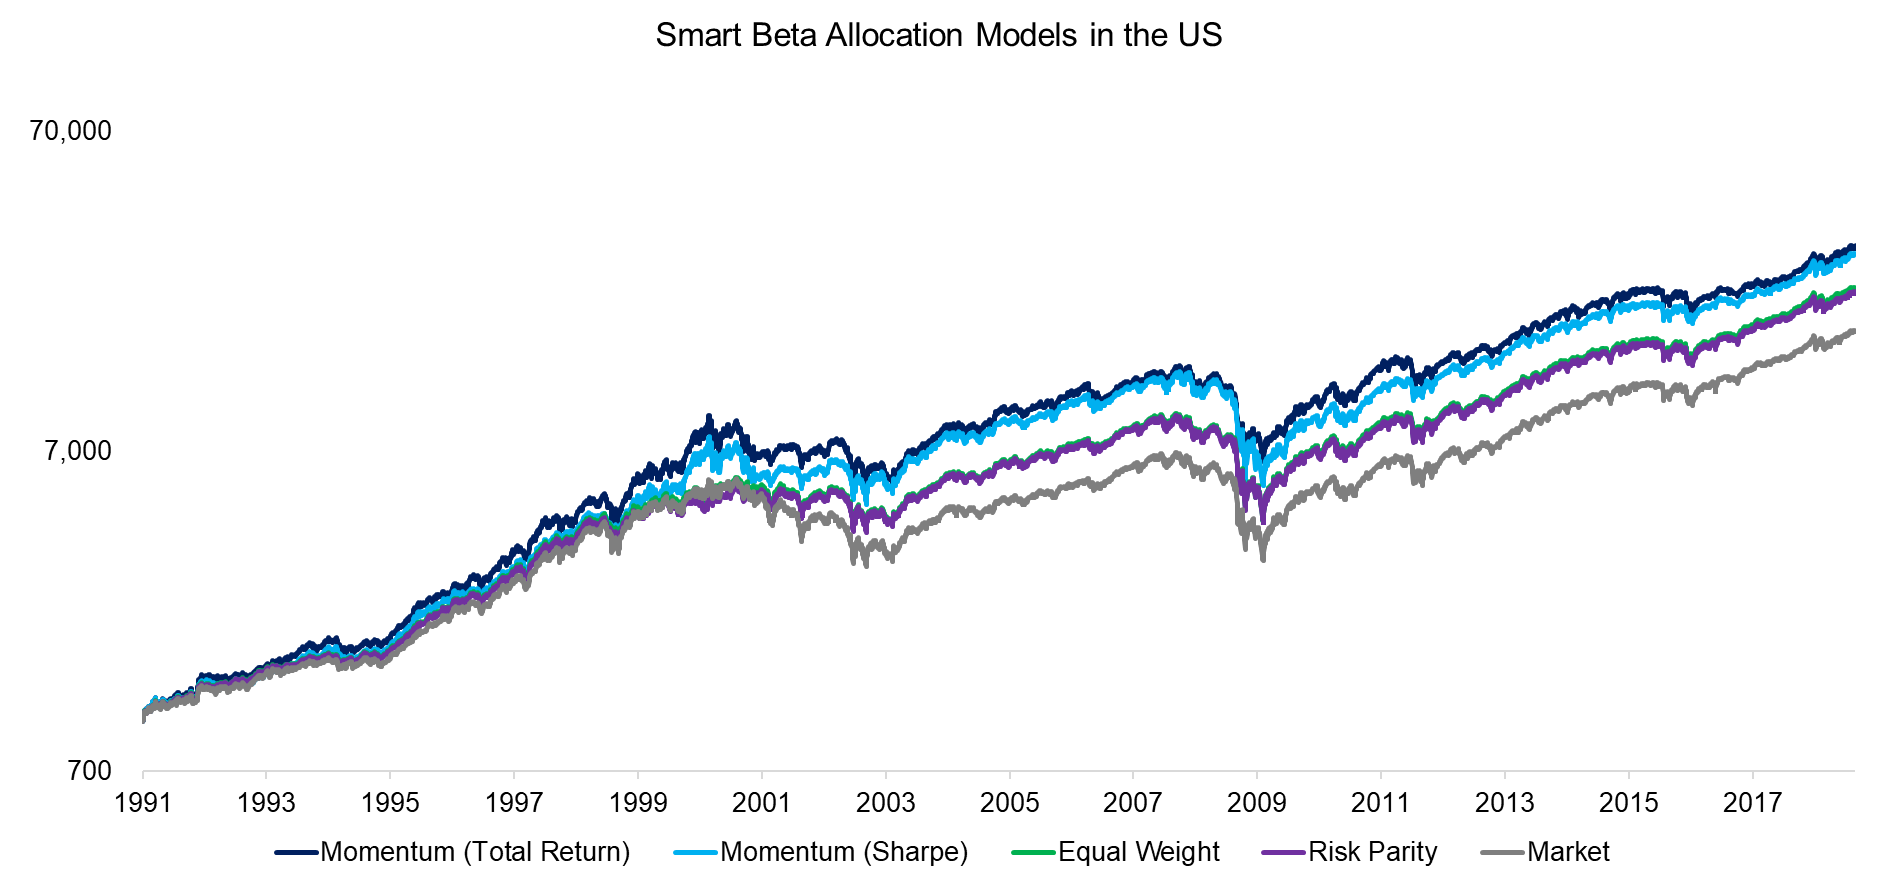 Smart Beta Allocation Models in the US